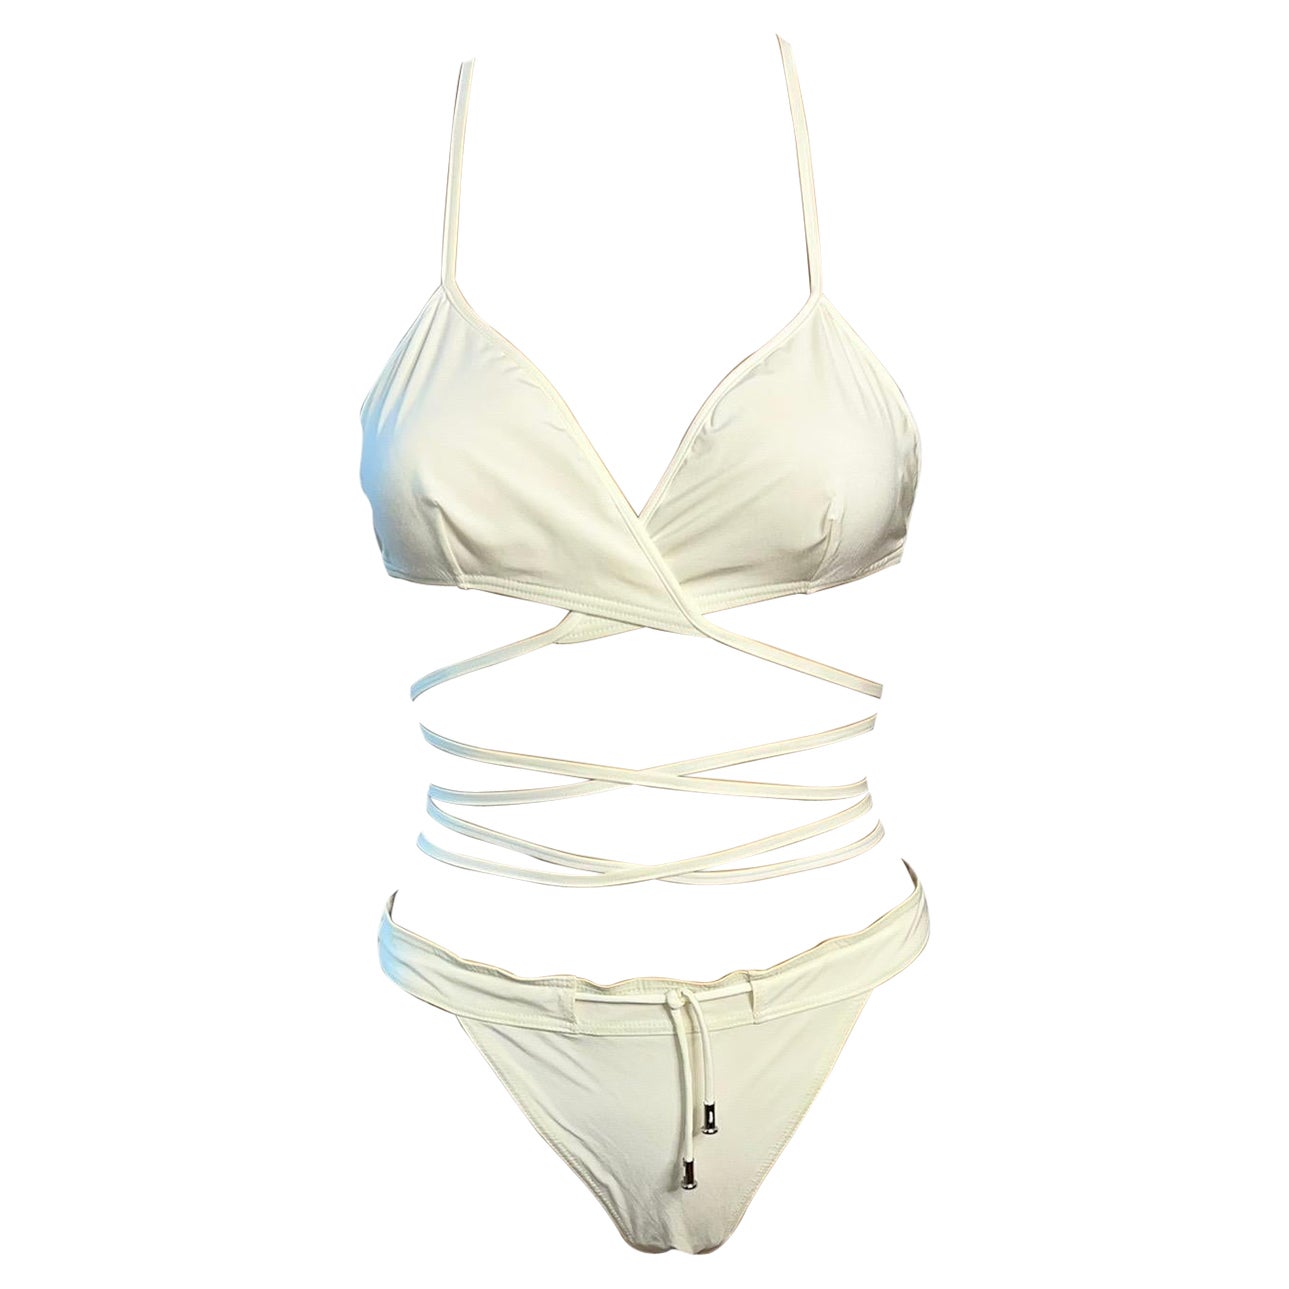 Tom Ford for Gucci S/S 2000 Runway Wrap Ivory Two-Piece Bikini Swimsuit Swimwear For Sale